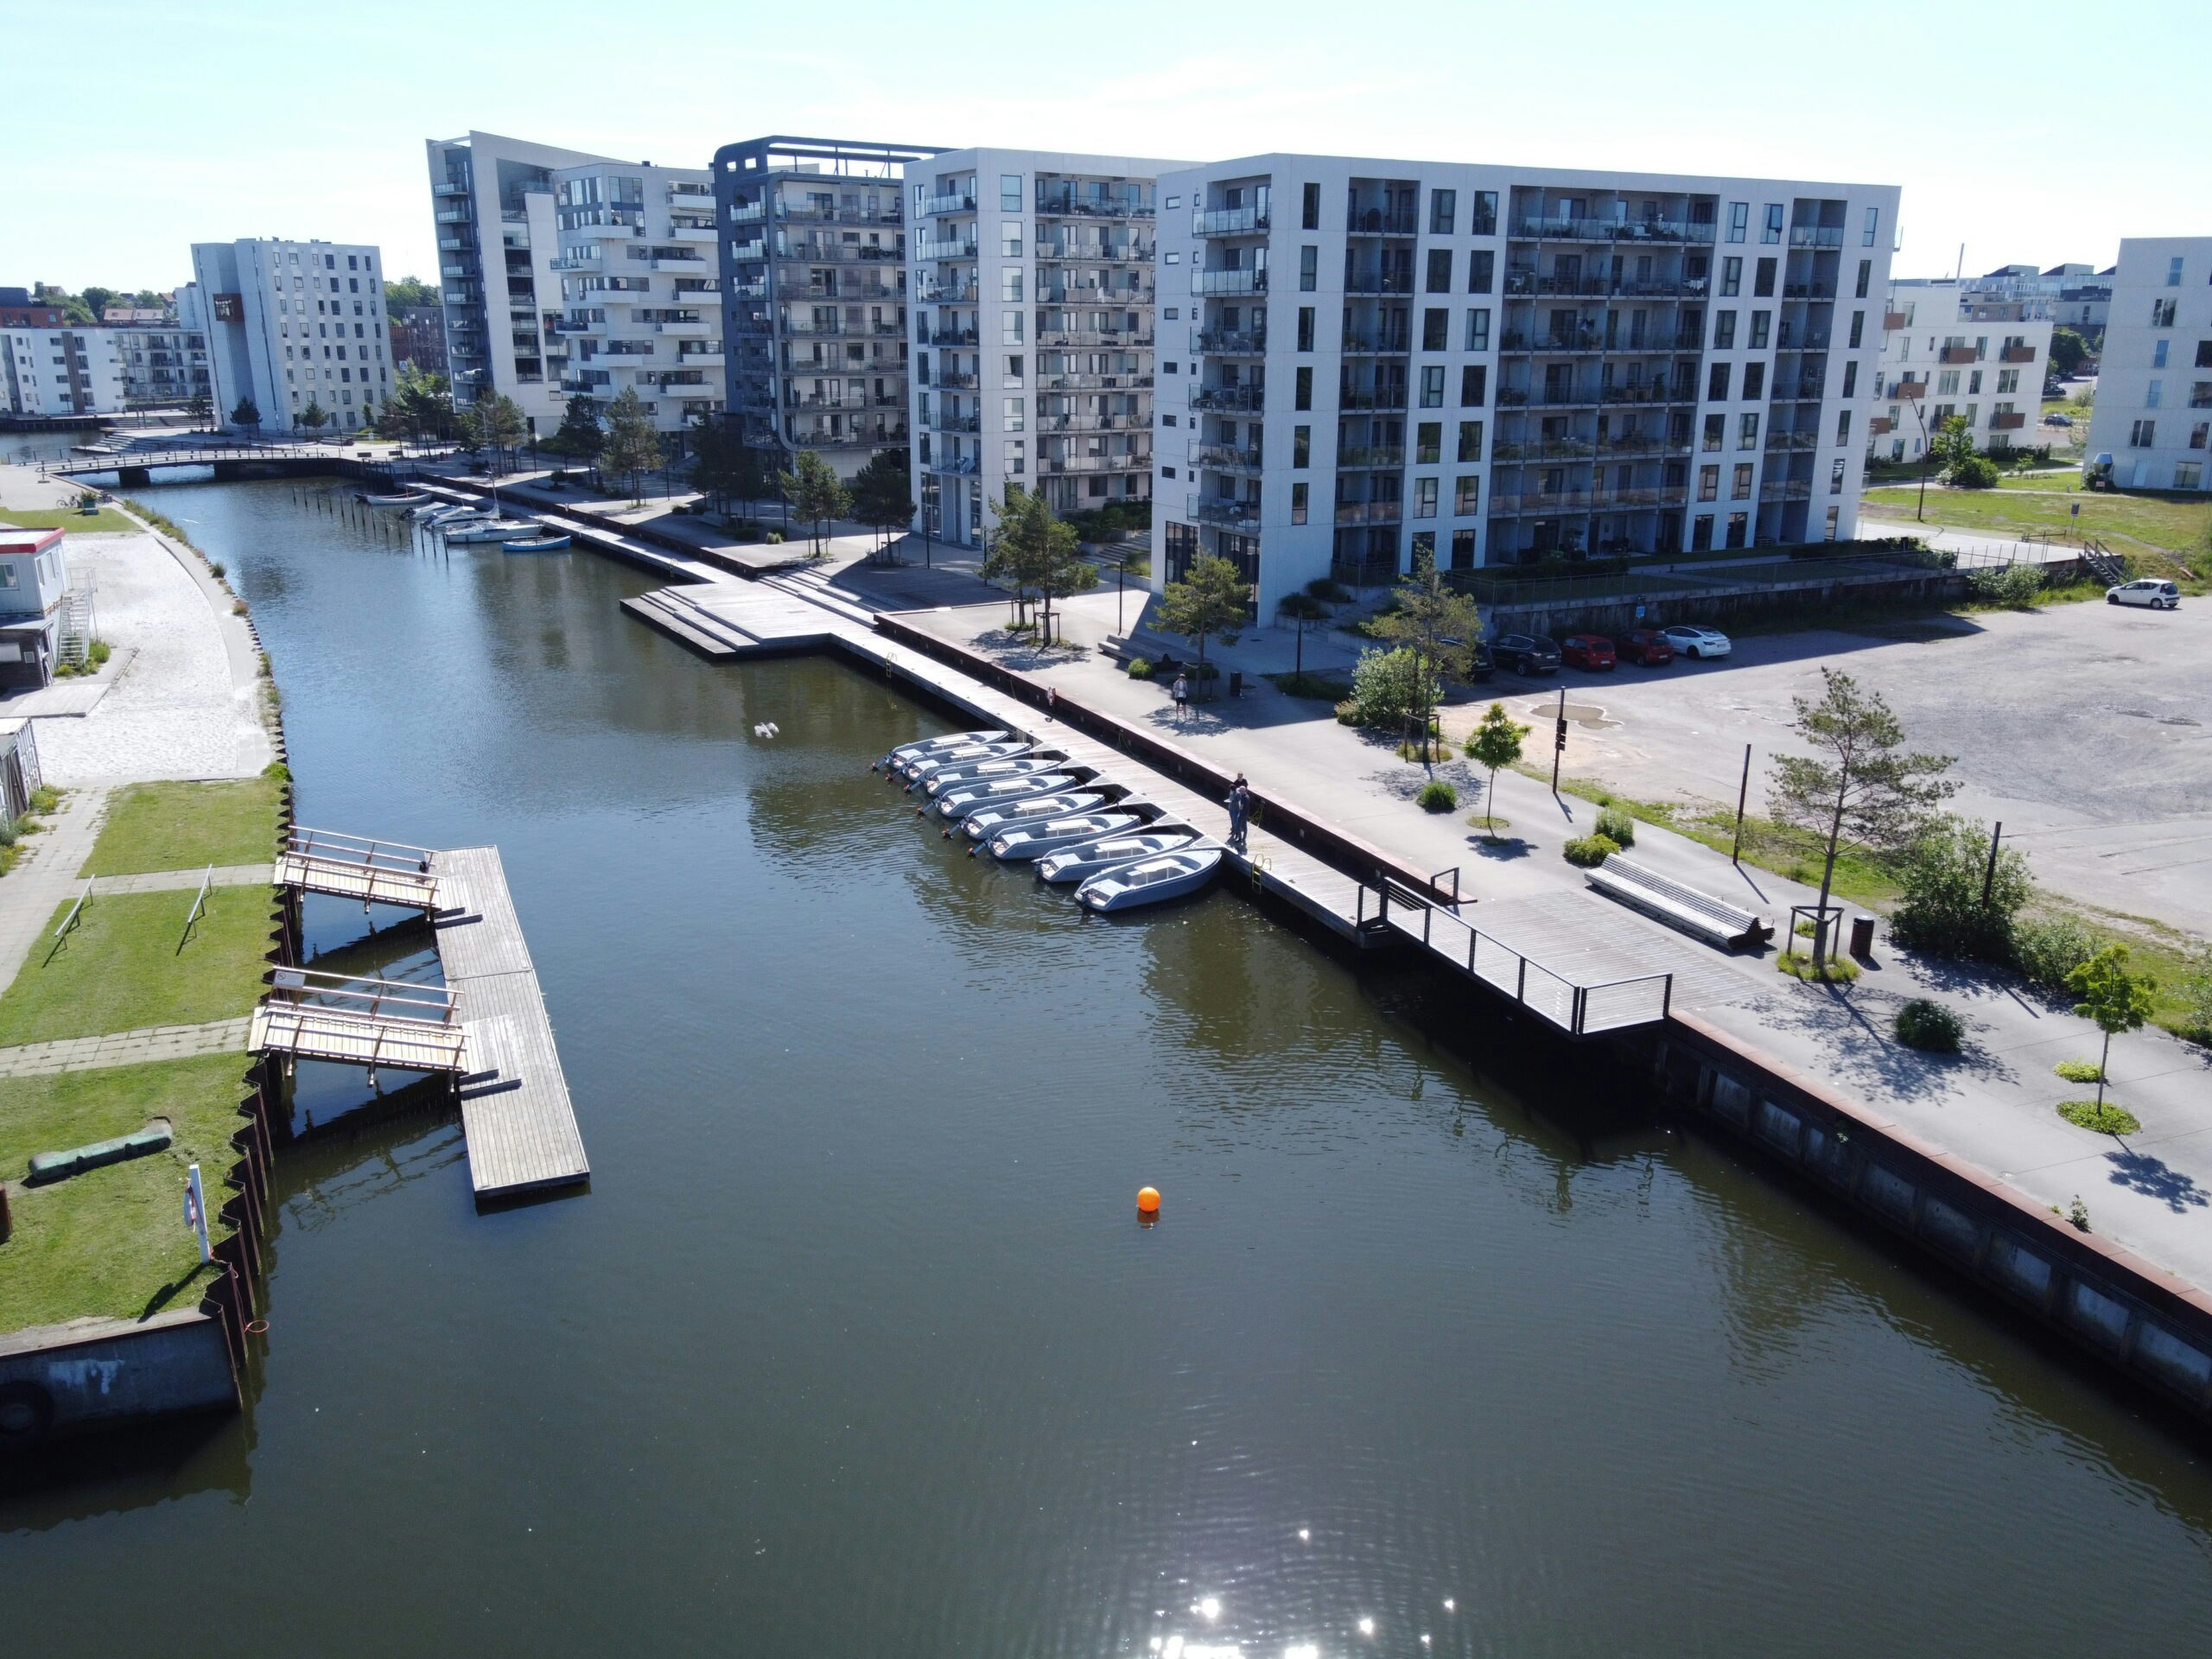 GoBoat Odense drone